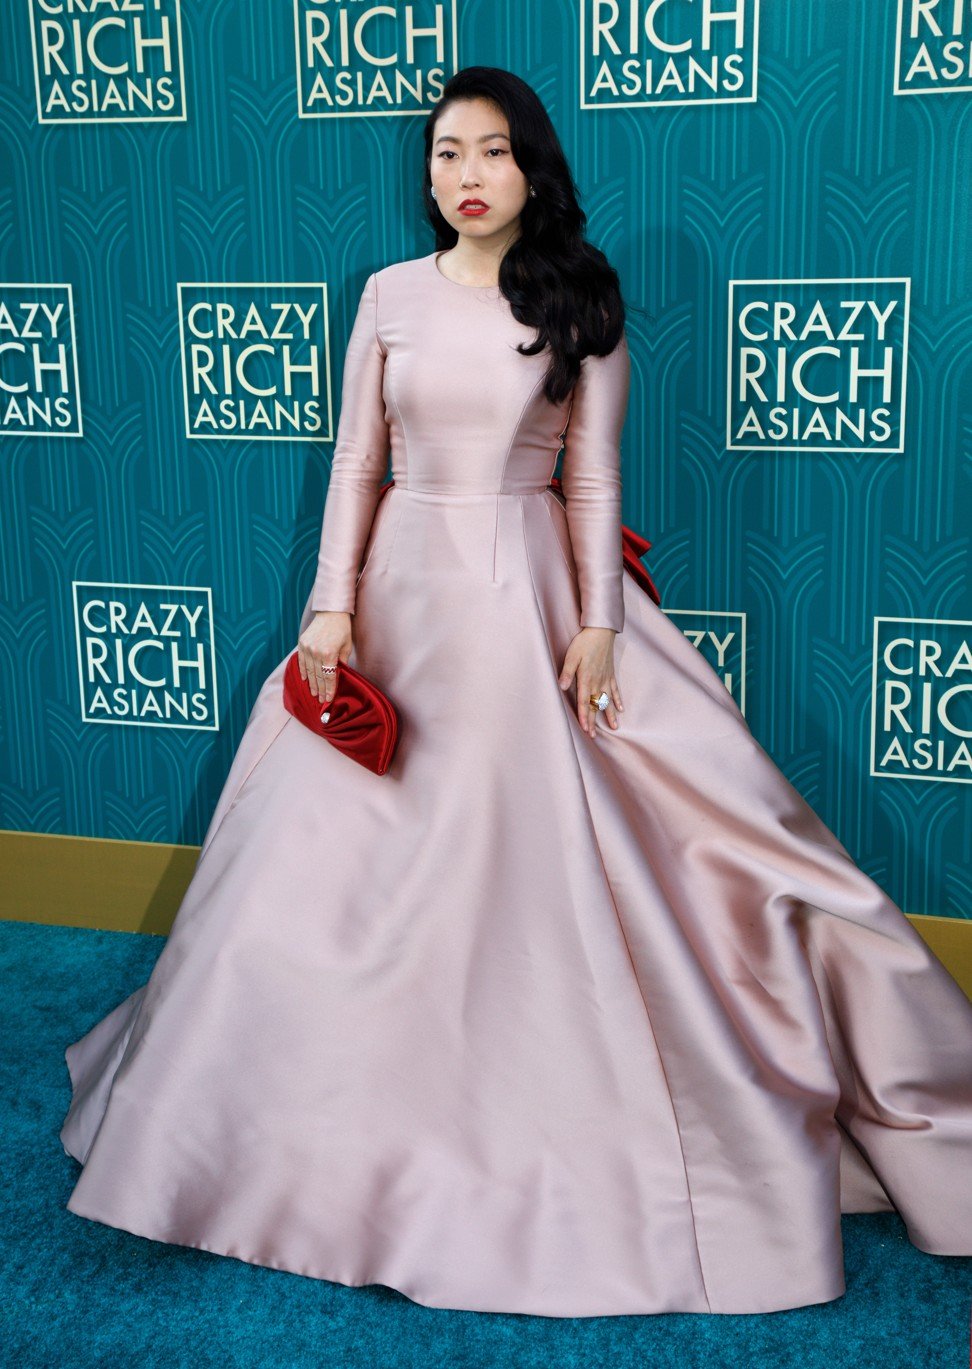 Crazy Rich Asians red carpet – Michelle Yeoh, Constance Wu and cast ...